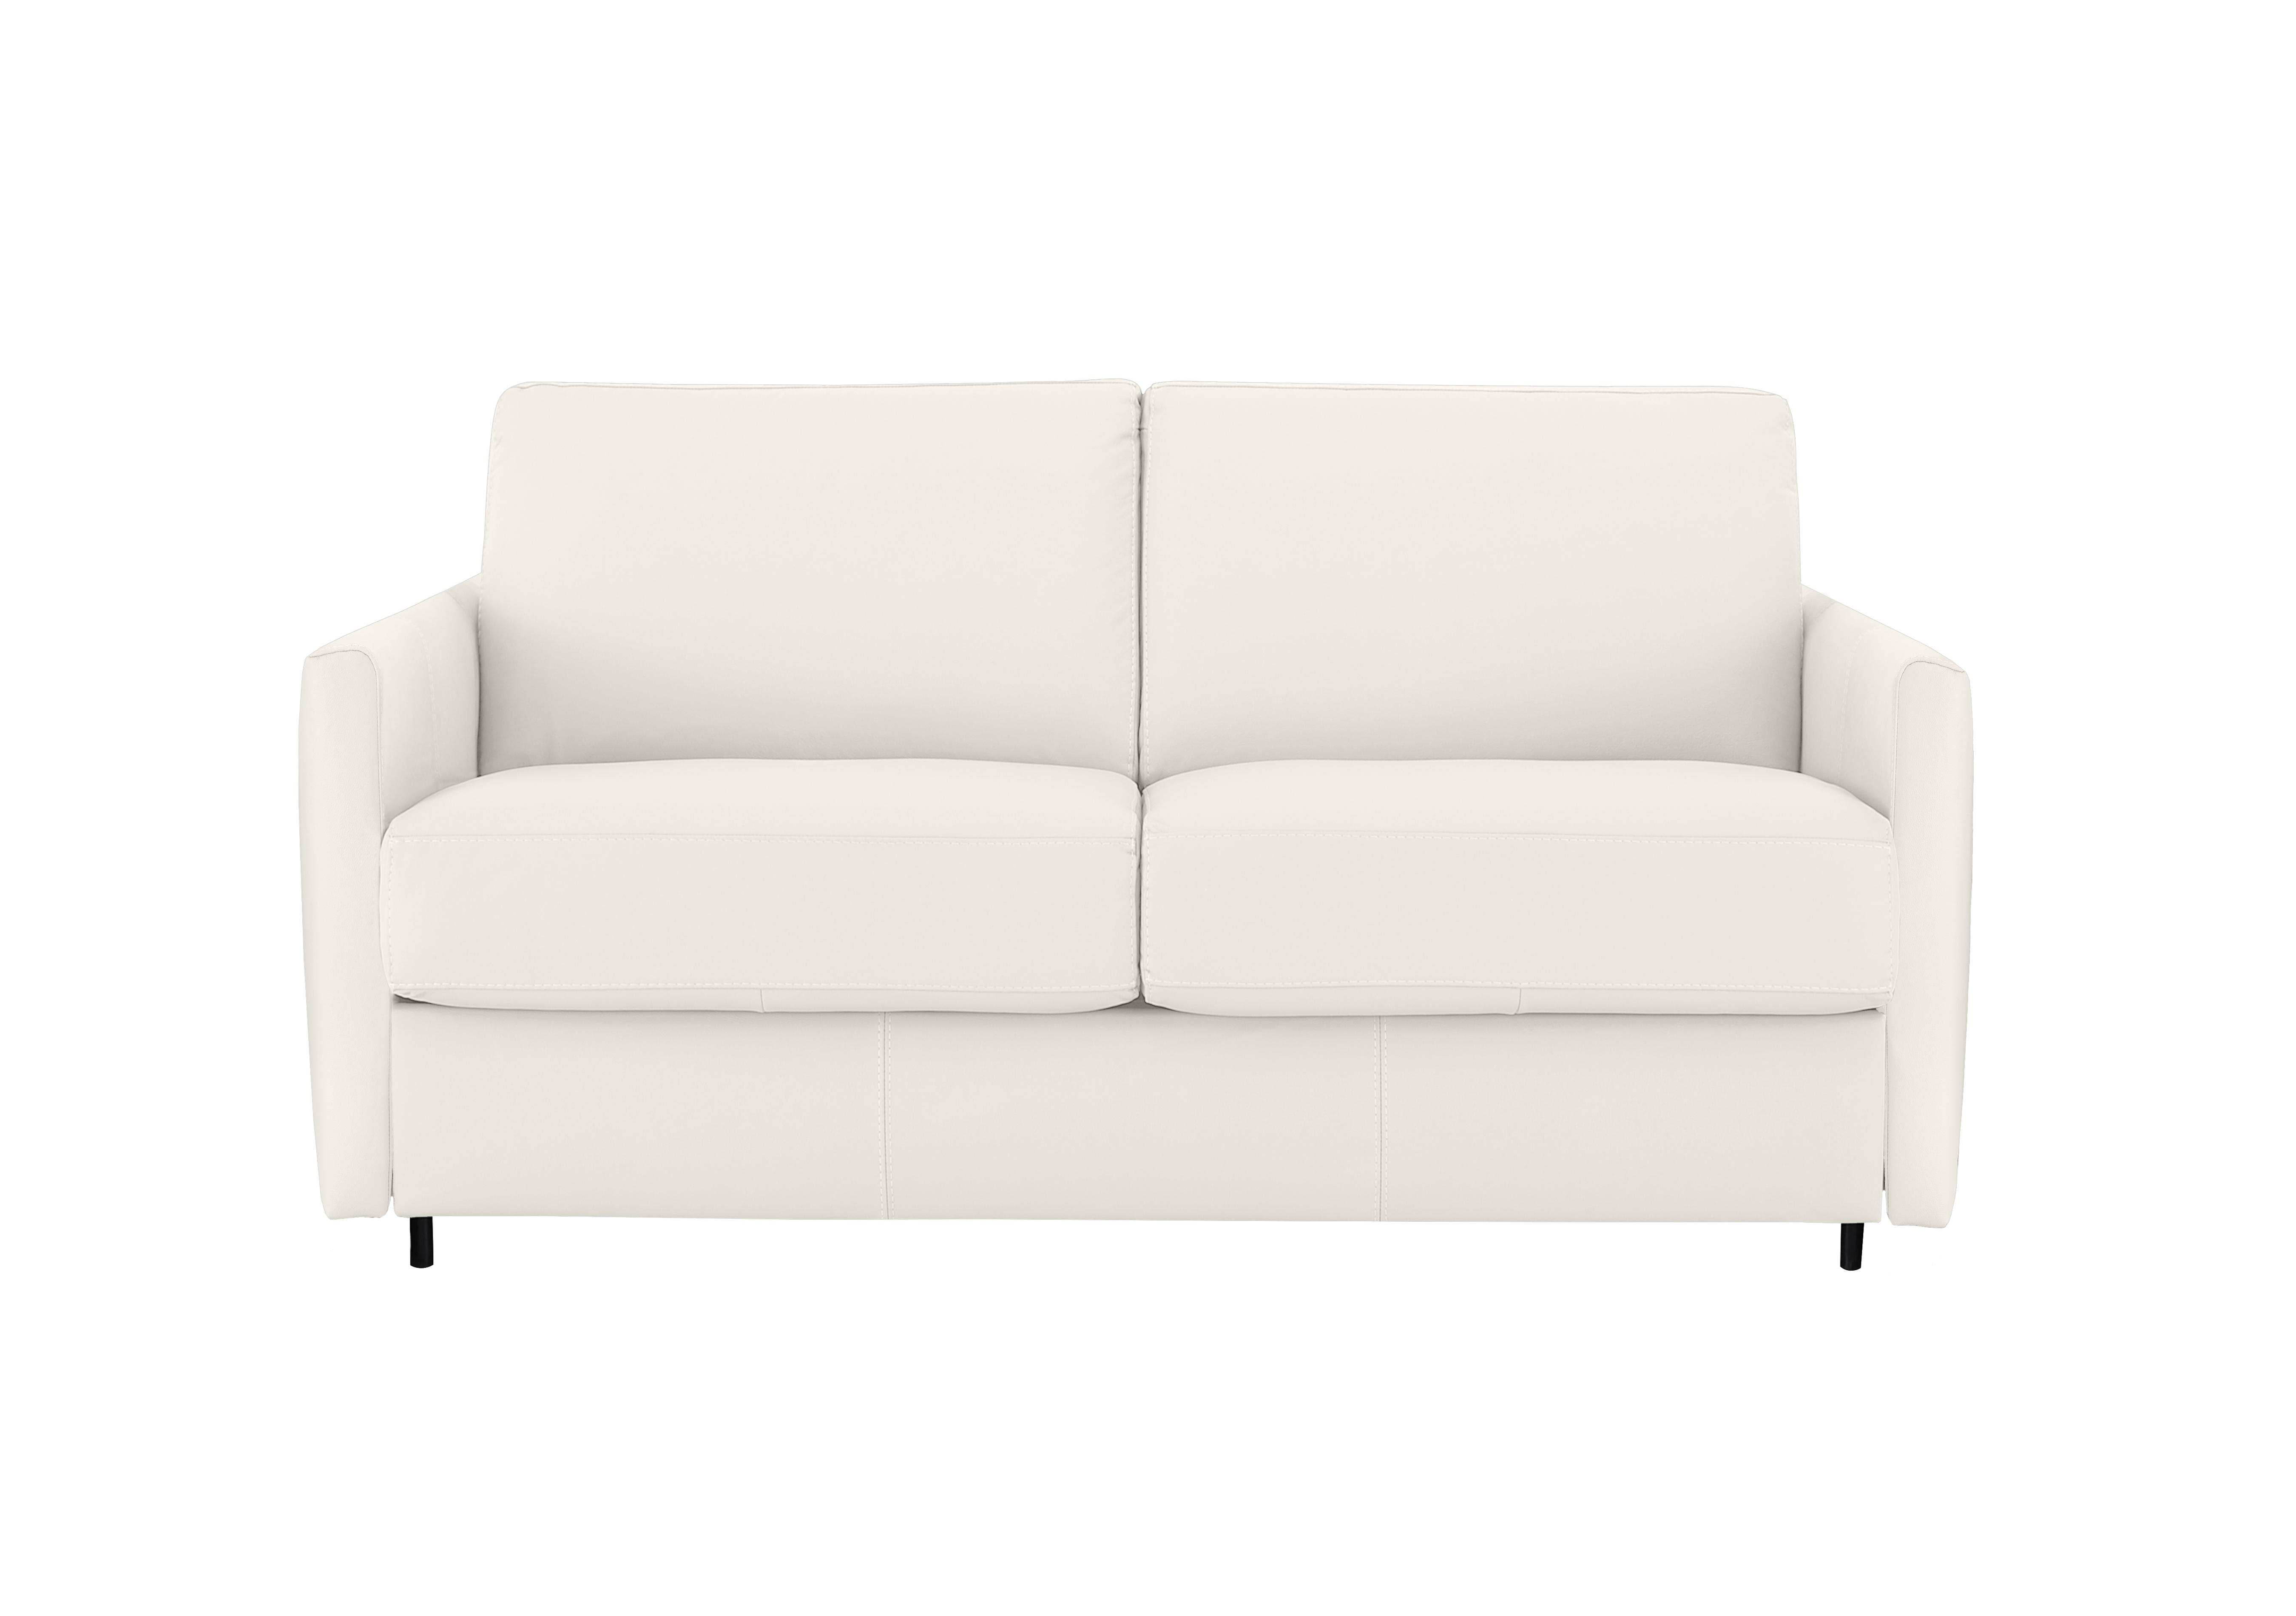 Alcova 2 Seater Leather Sofa Bed with Slim Arms in Torello Bianco 93 on Furniture Village